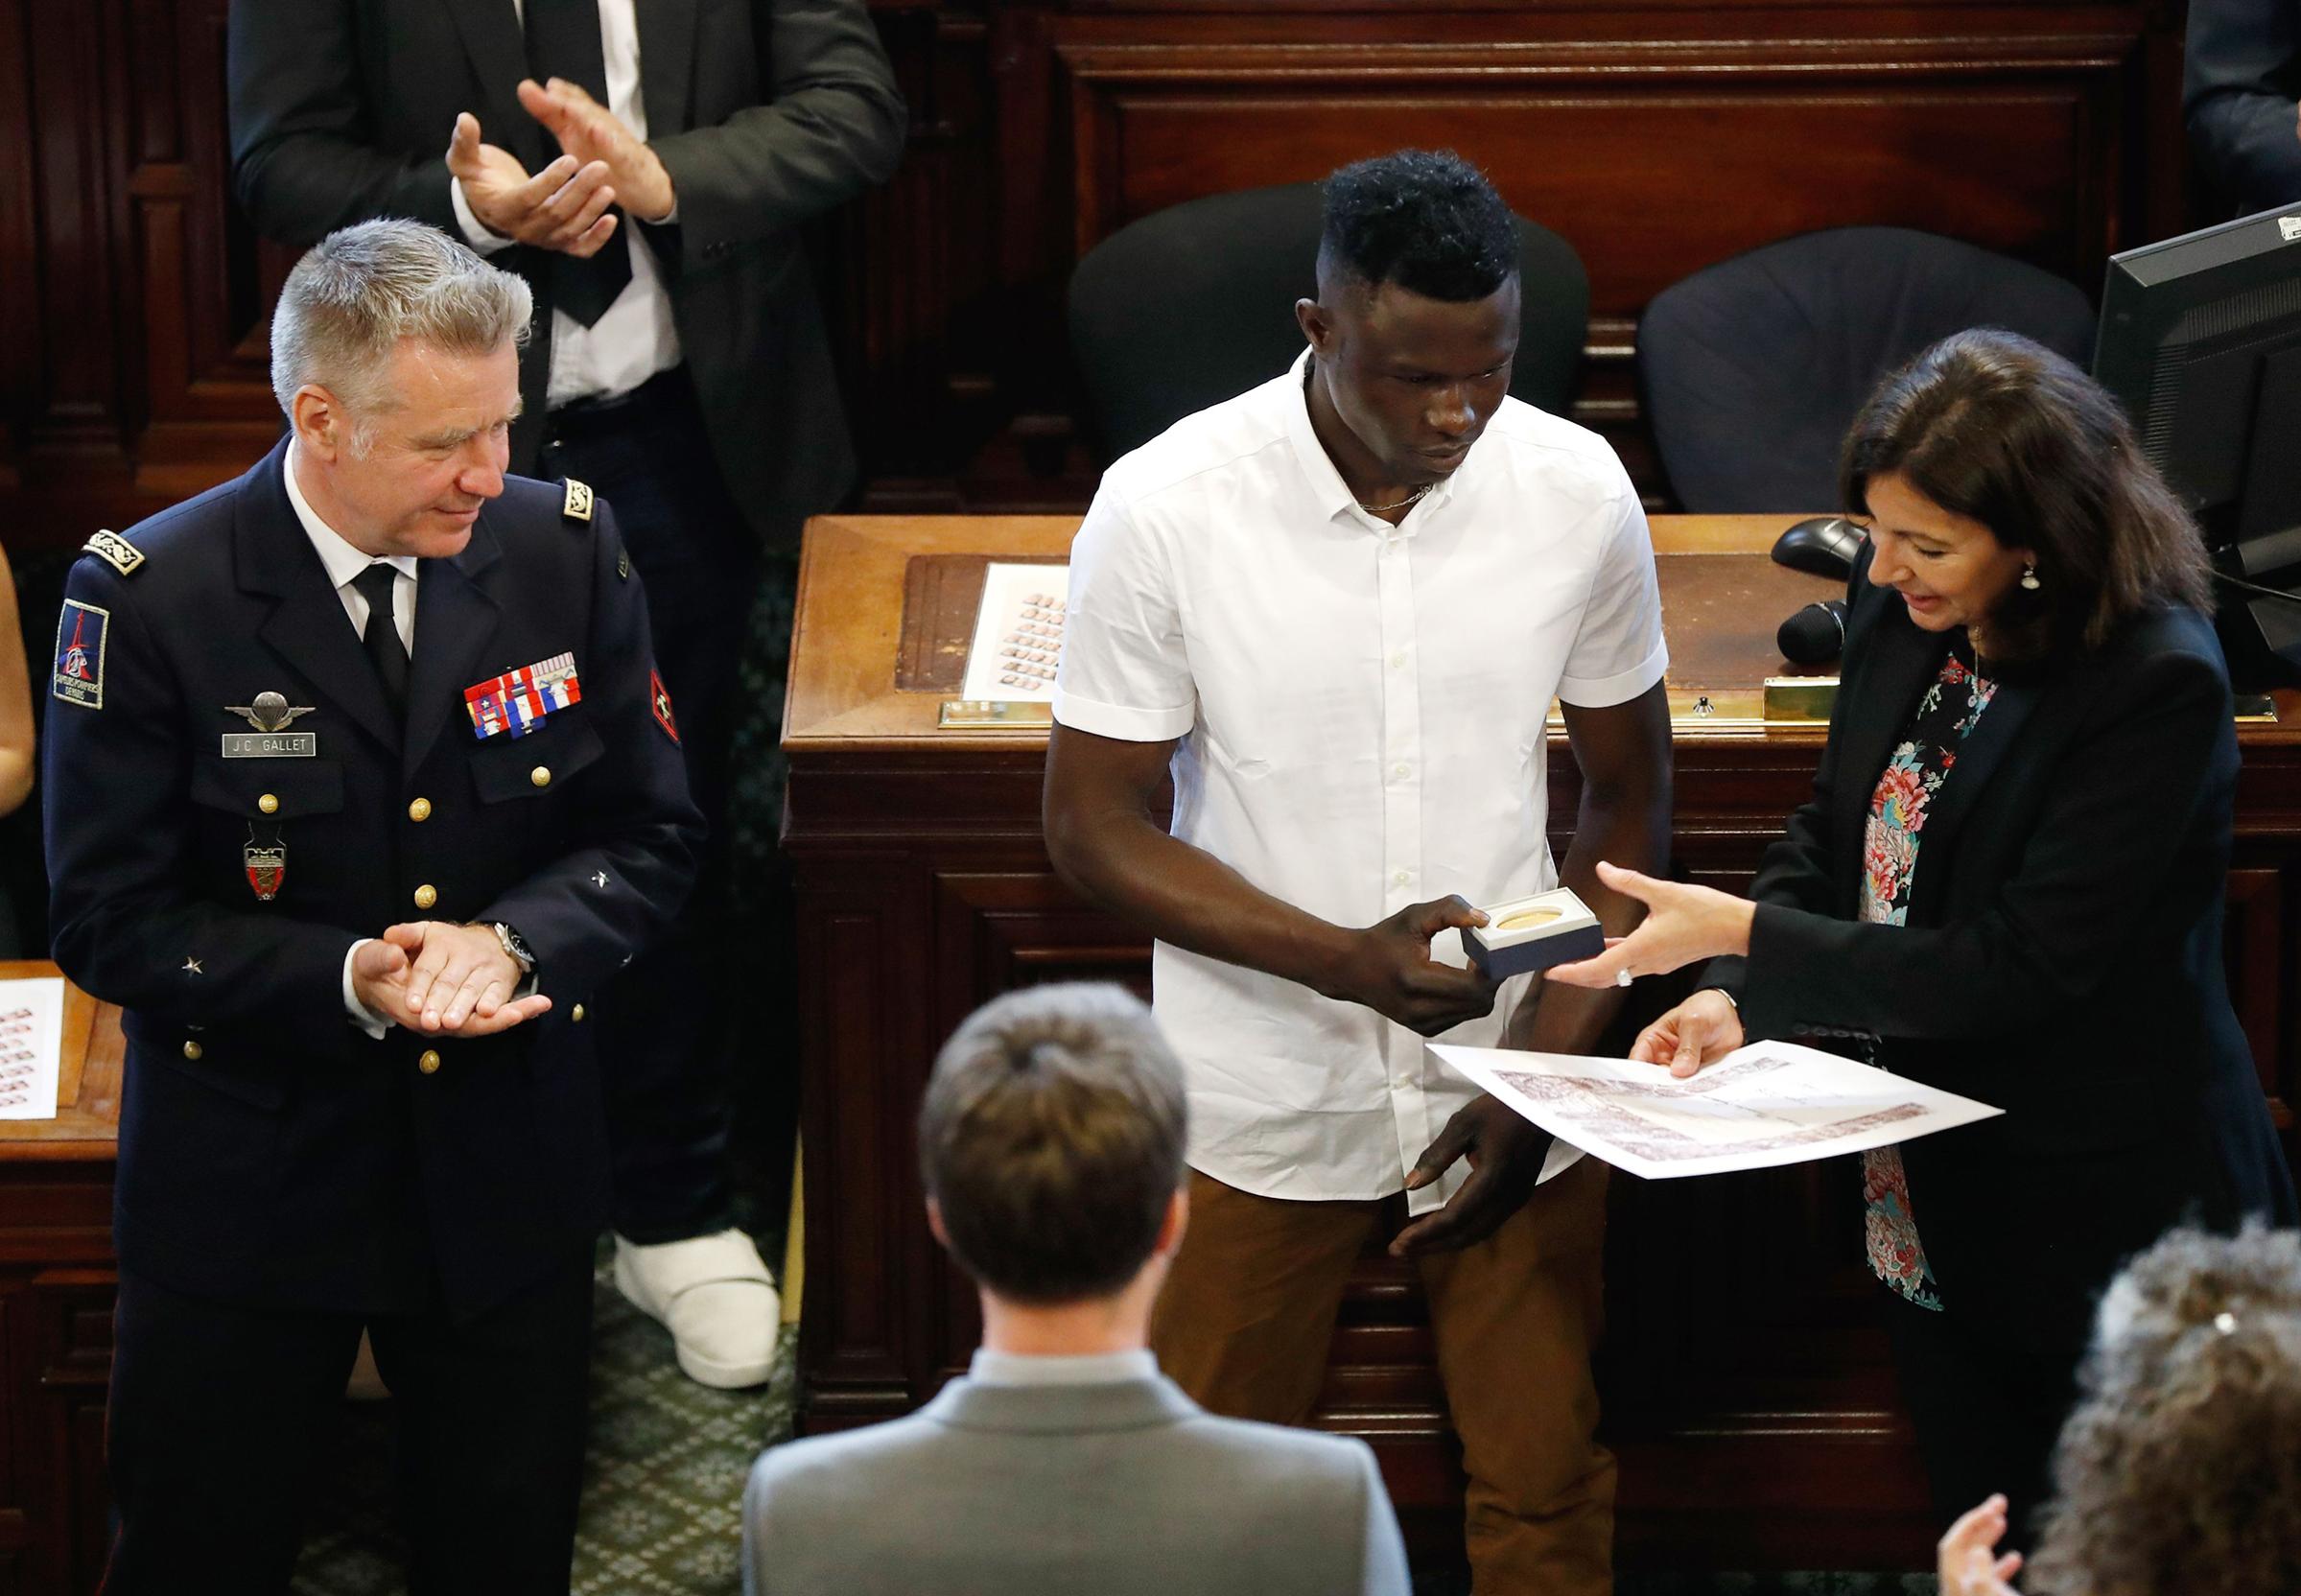 Mamoudou Gassama, center, is awarded with the city's Grand Vermeil medal by Paris' mayor Anne Hidalgo in Paris on June 4, 2018.